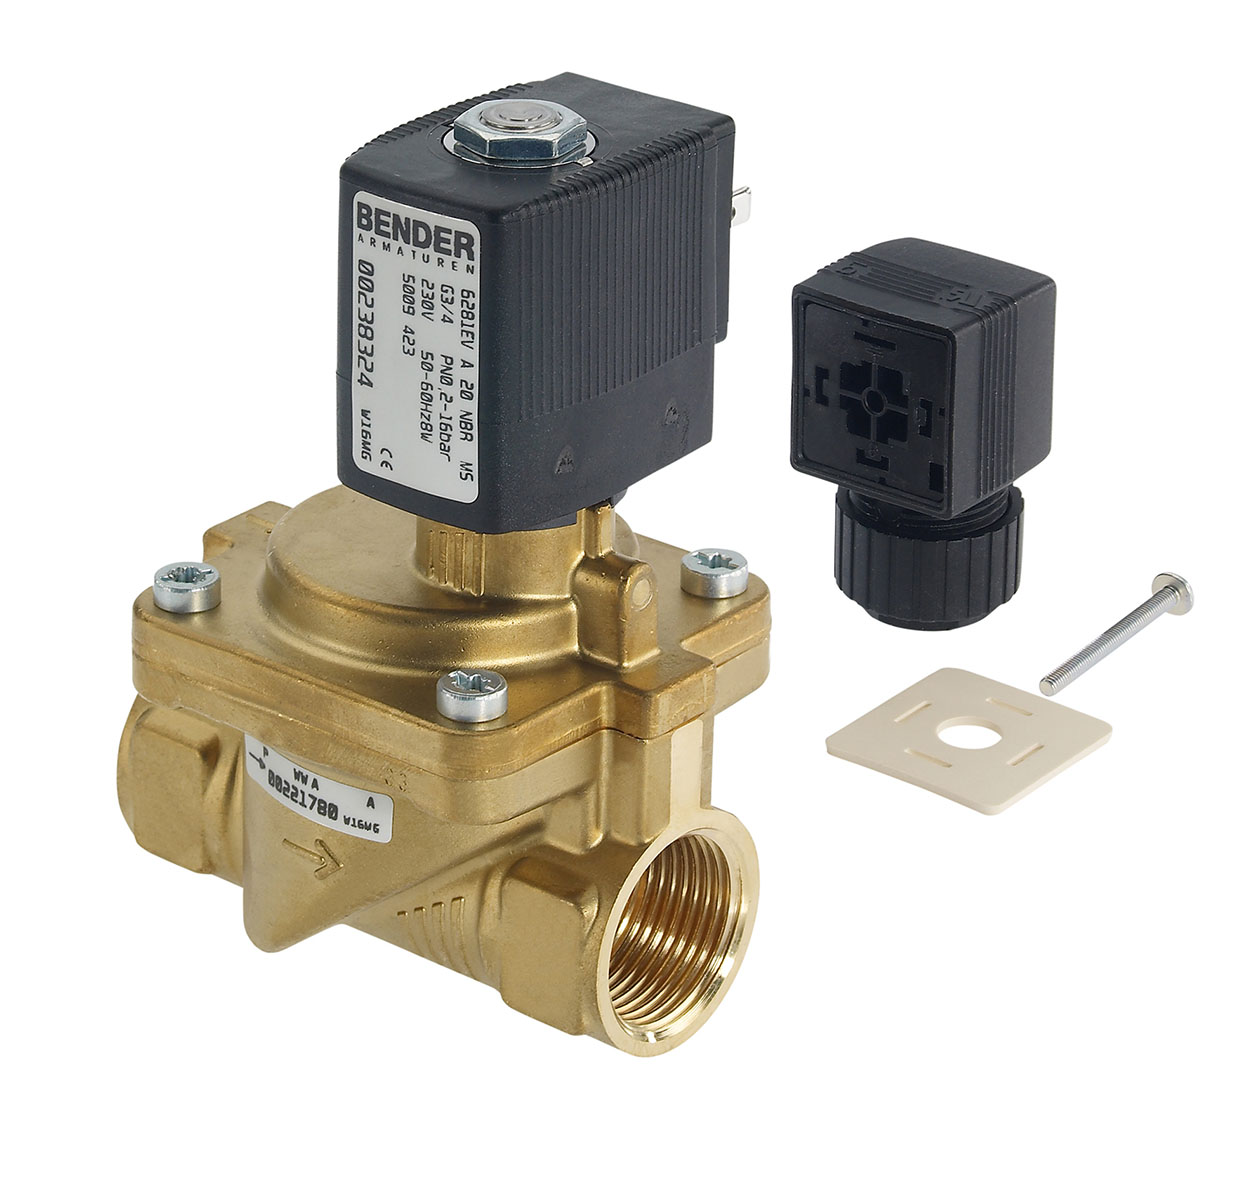 5009423 - 2/2 way solenoid valve normally closed for fluids and compressed air Type 3; female thread